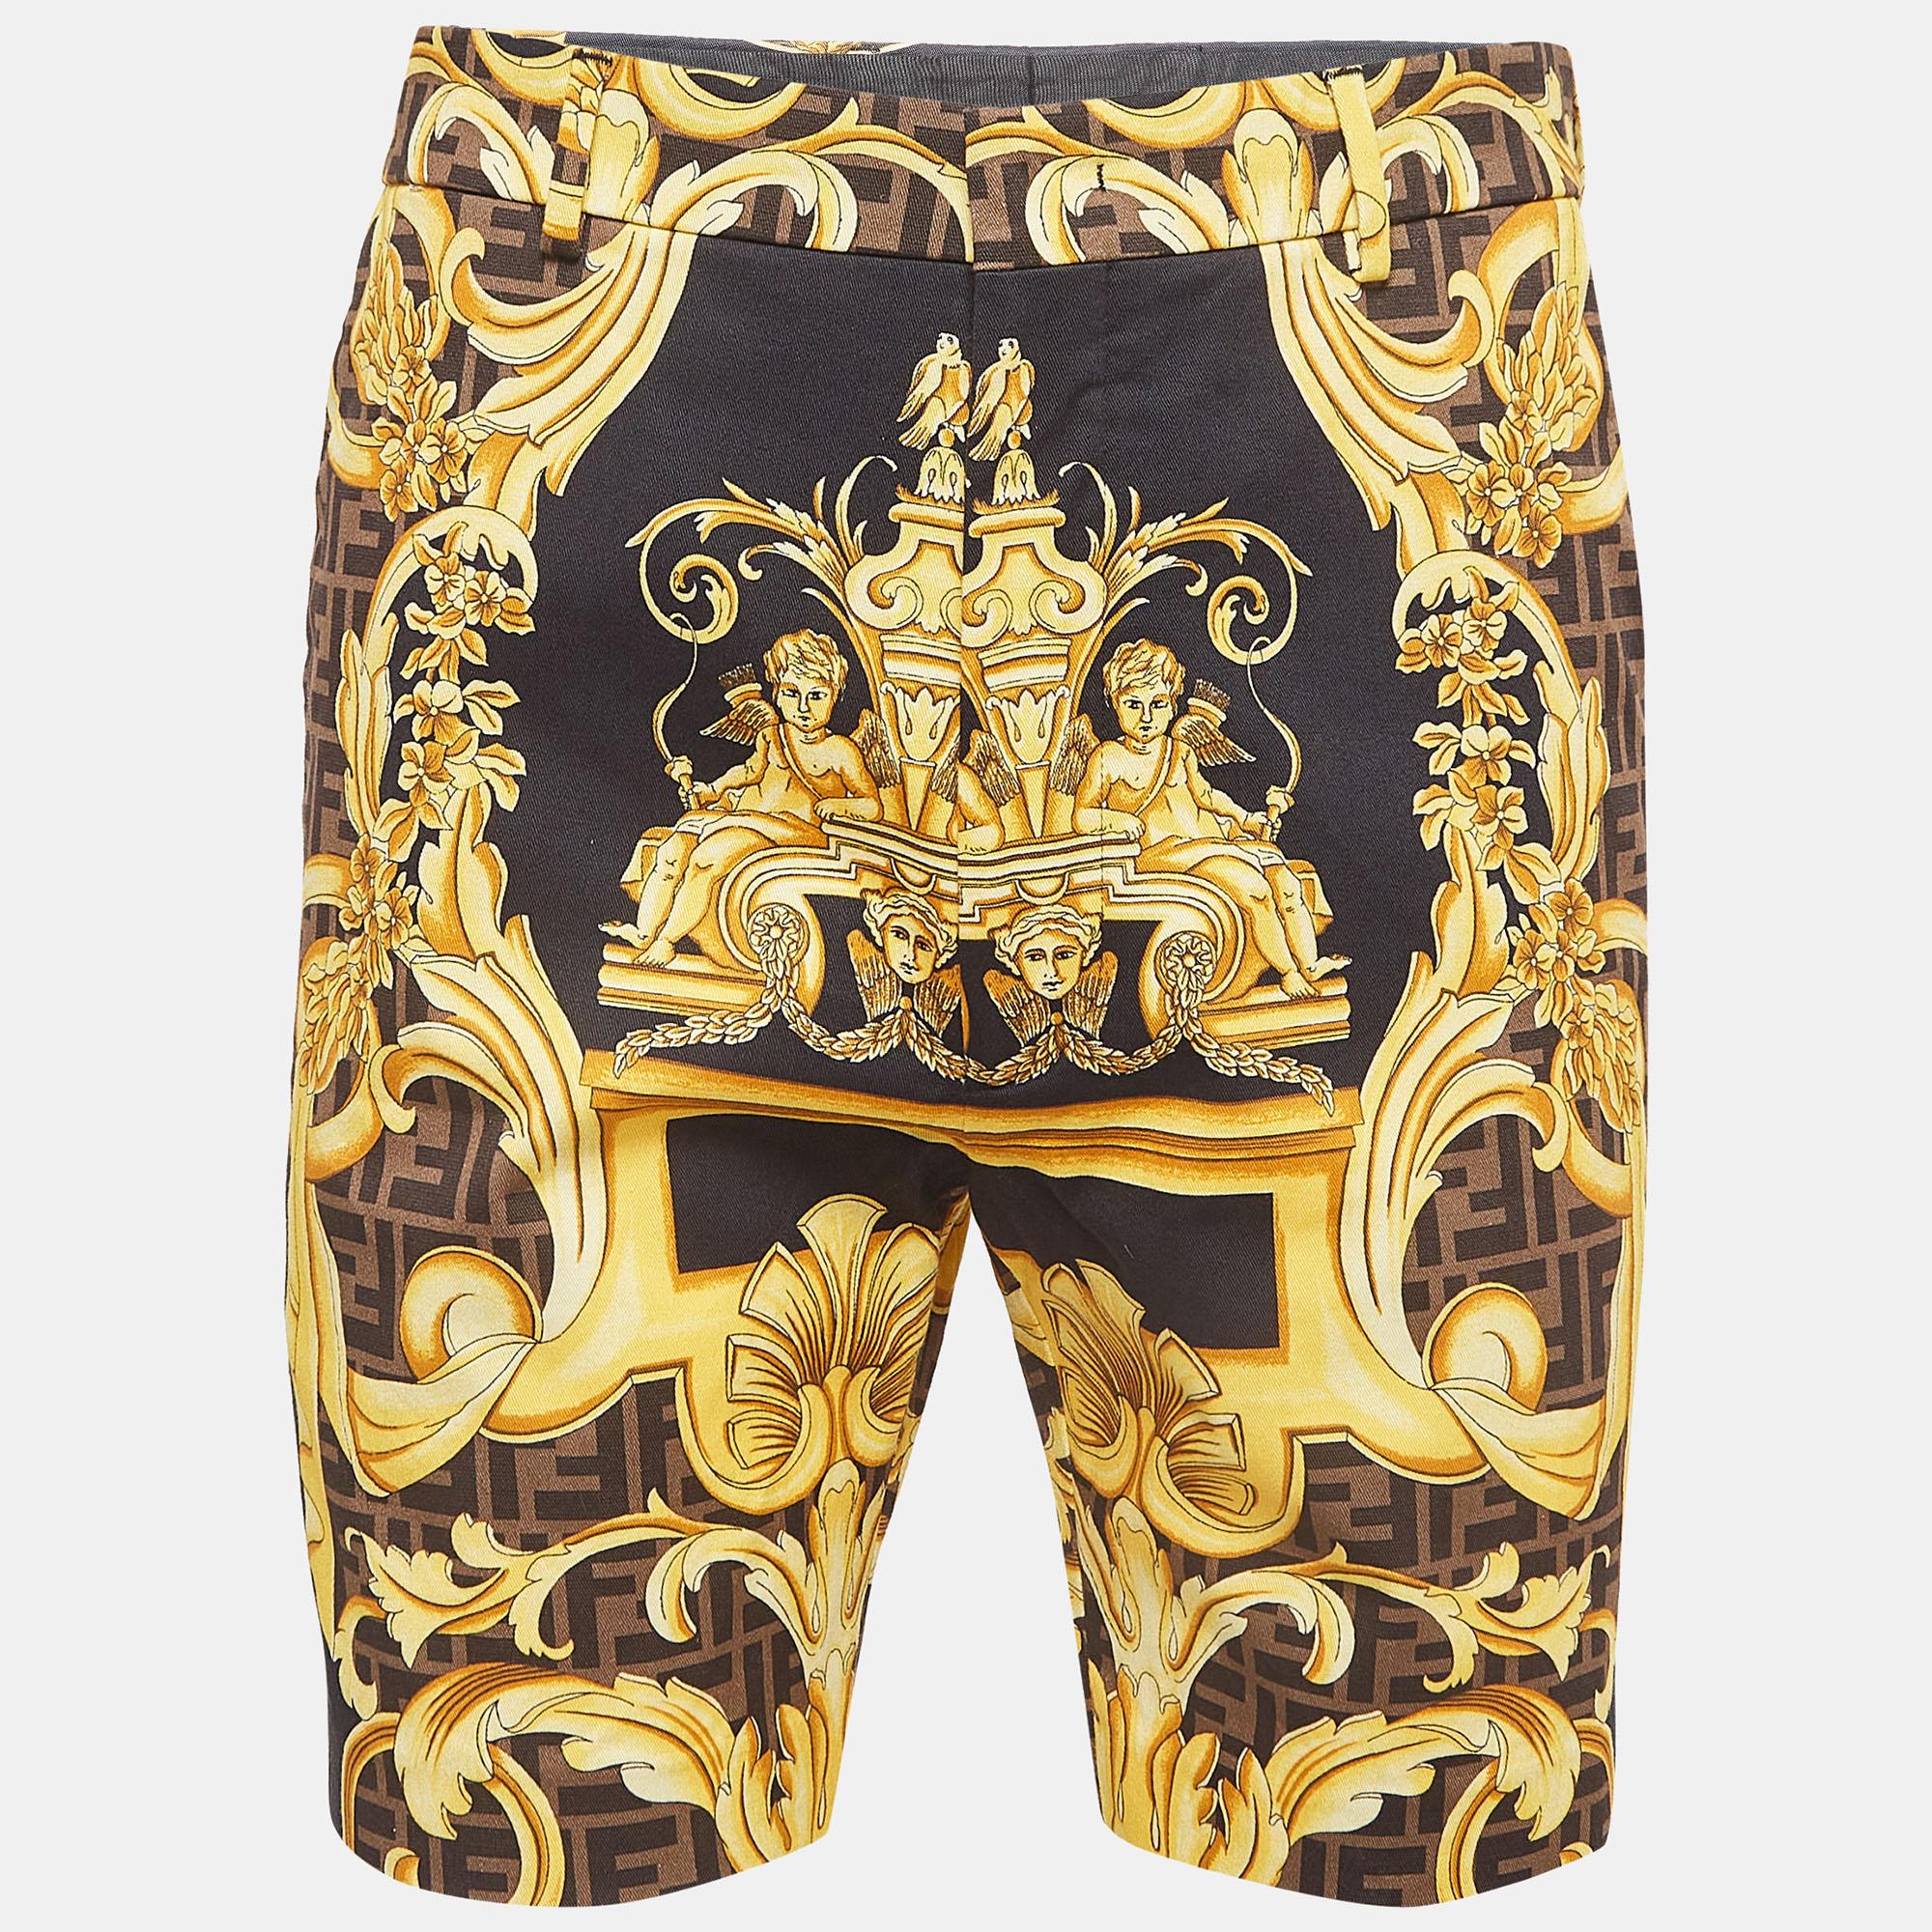 Crafted in luxurious cotton, the Fendi x Versace bermuda shorts fuse opulence with street-style edge. The intricate baroque pattern, featuring striking black and yellow hues, exudes boldness. With a comfortable fit and iconic branding, these shorts